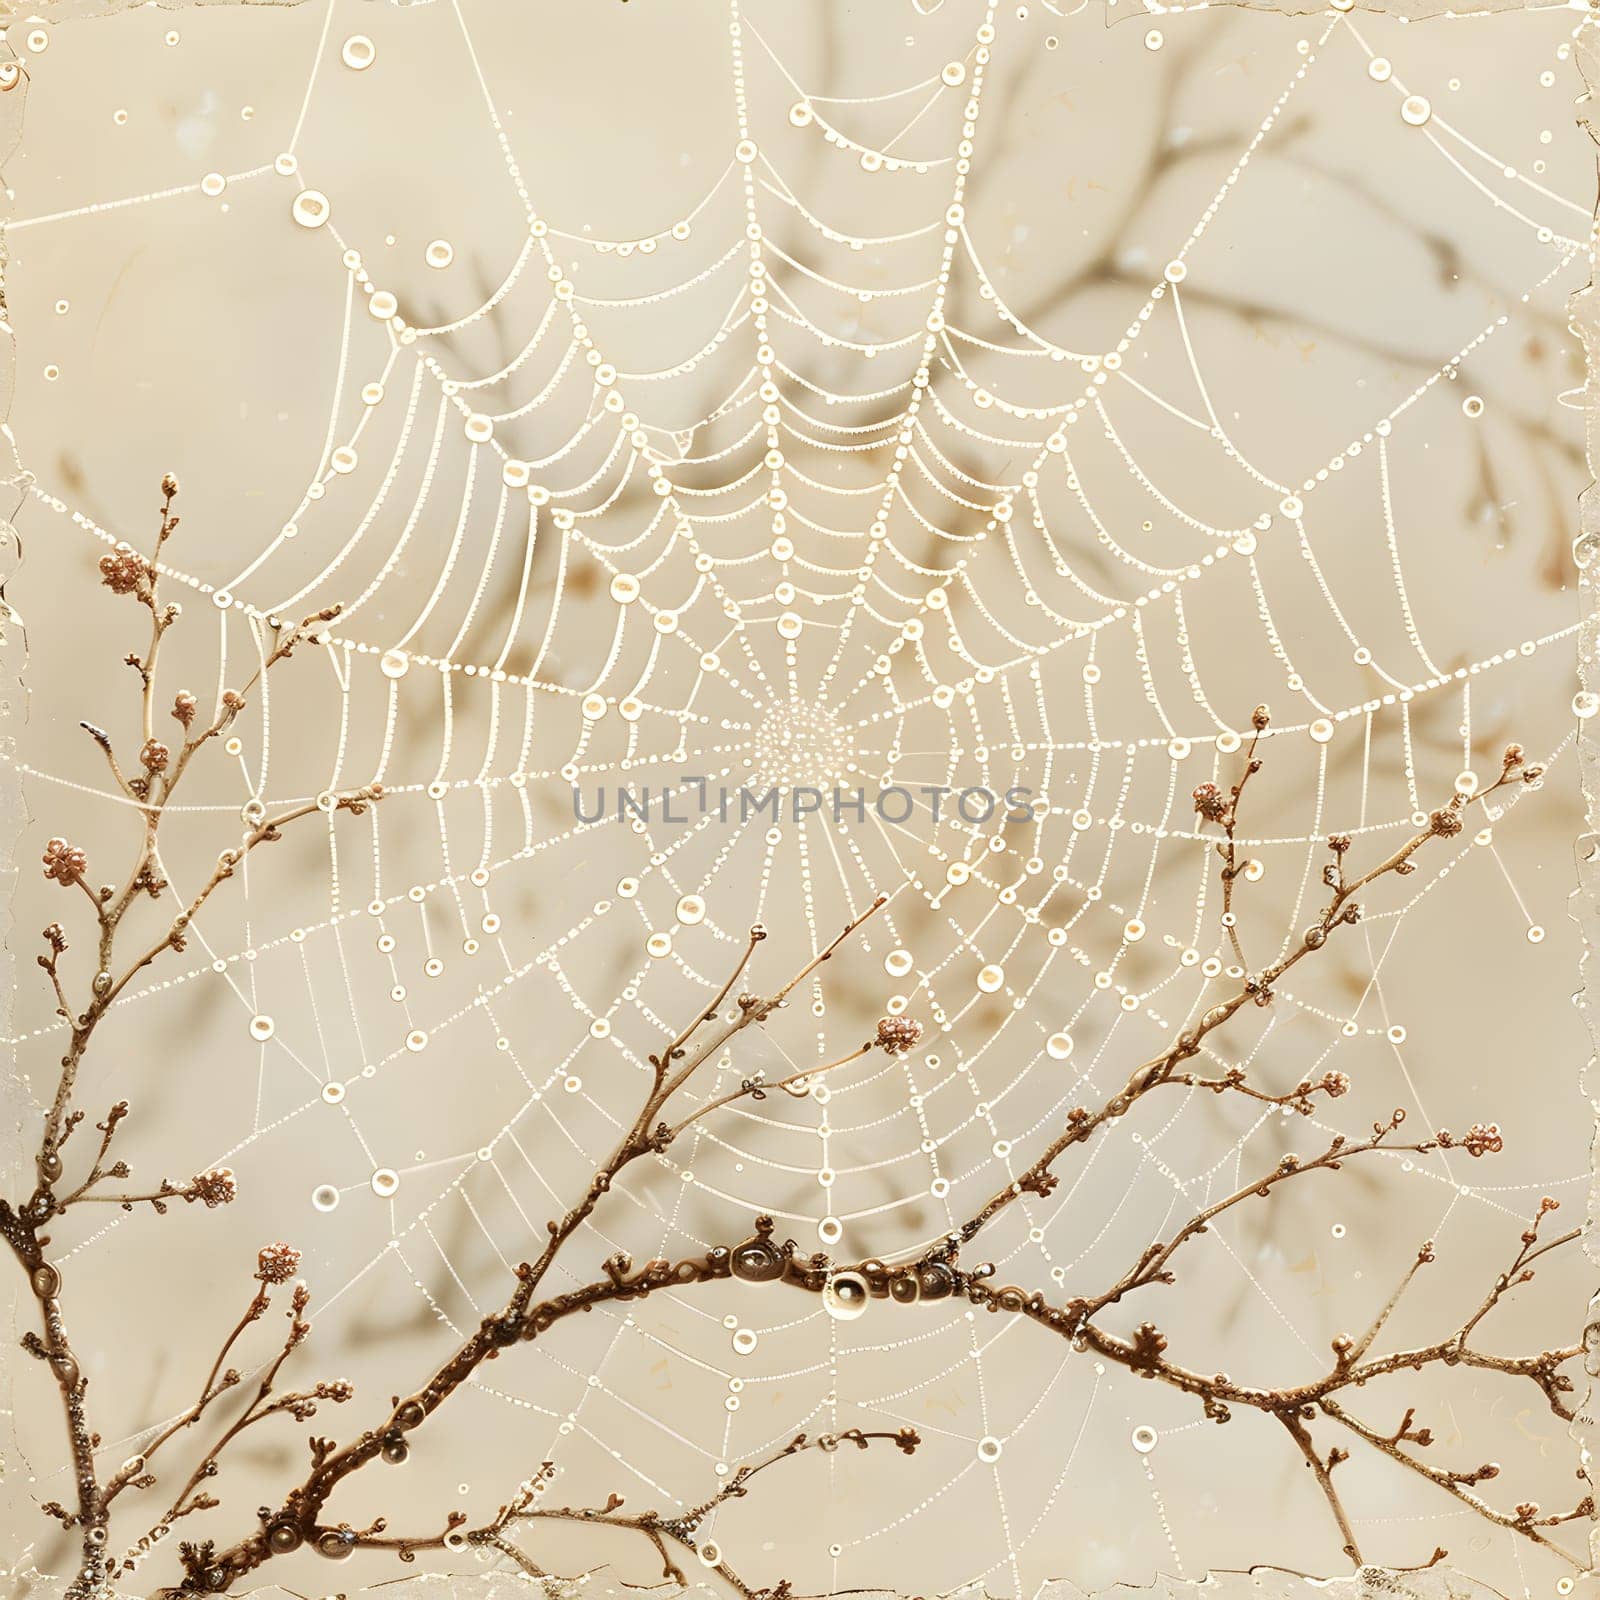 An intricate spider web adorned with tints and shades hangs delicately from a tree branch, creating a symmetrical pattern that is natures own embellishment on the wood and twigs